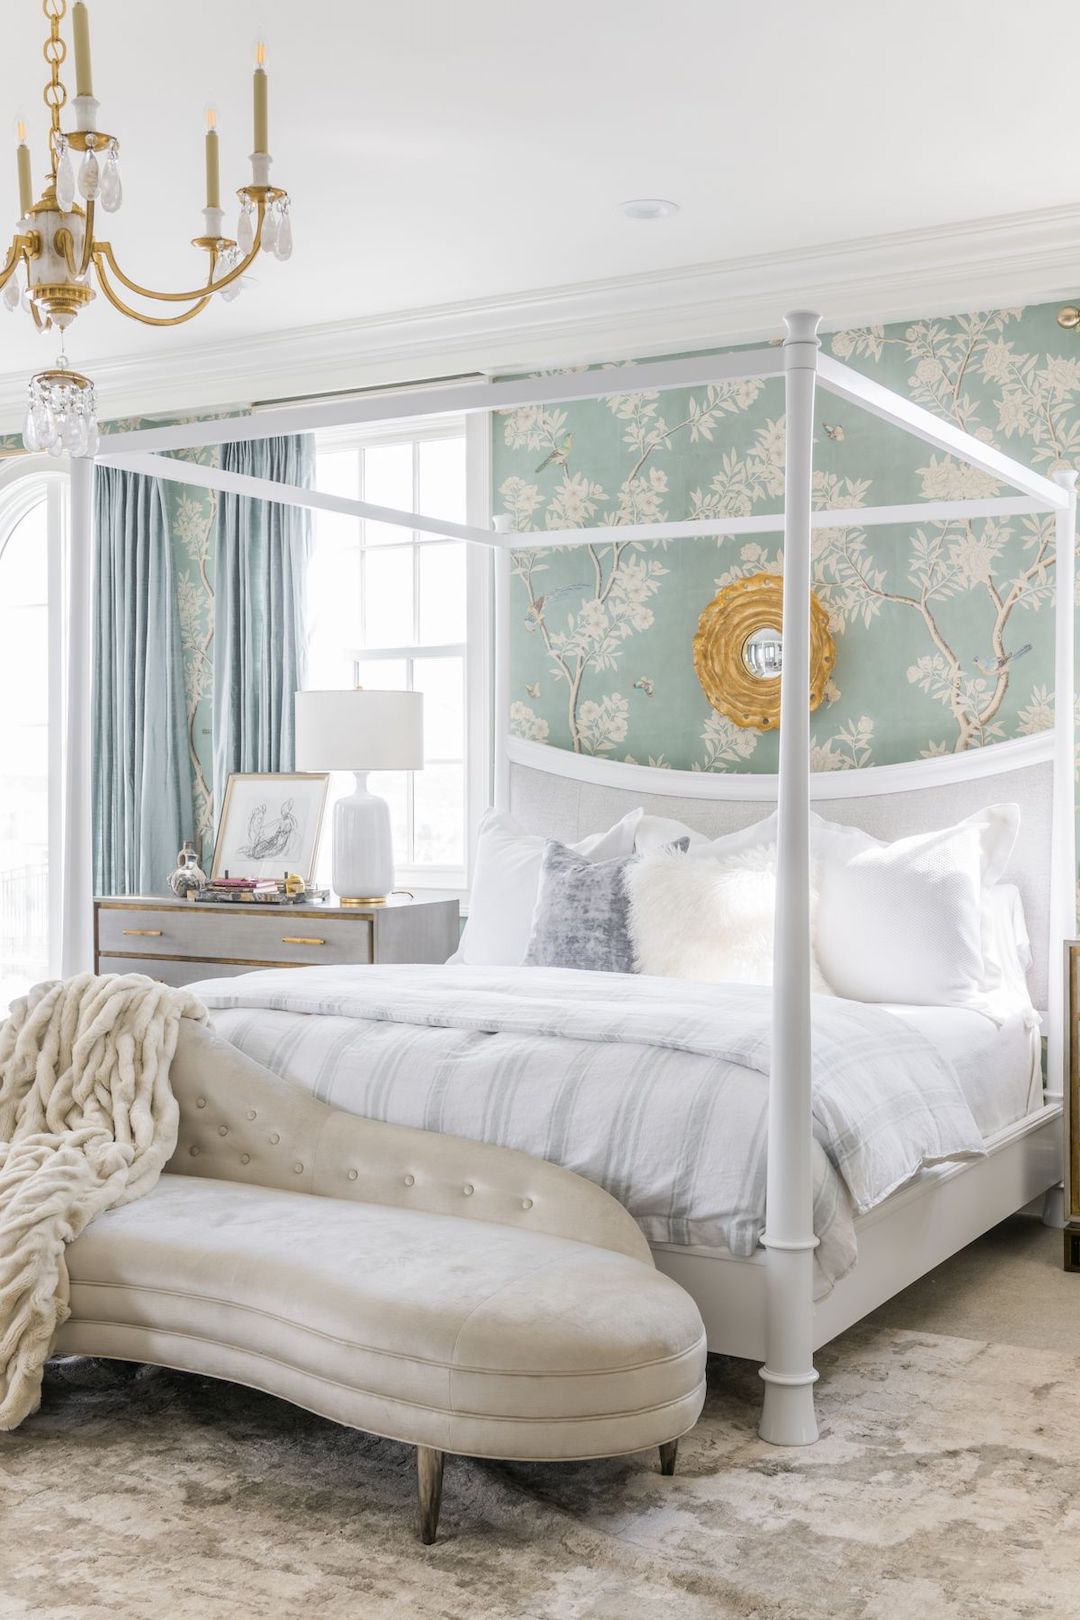 Glam Bedroom with Blue Floral Wallpaper via Rachel Parcell